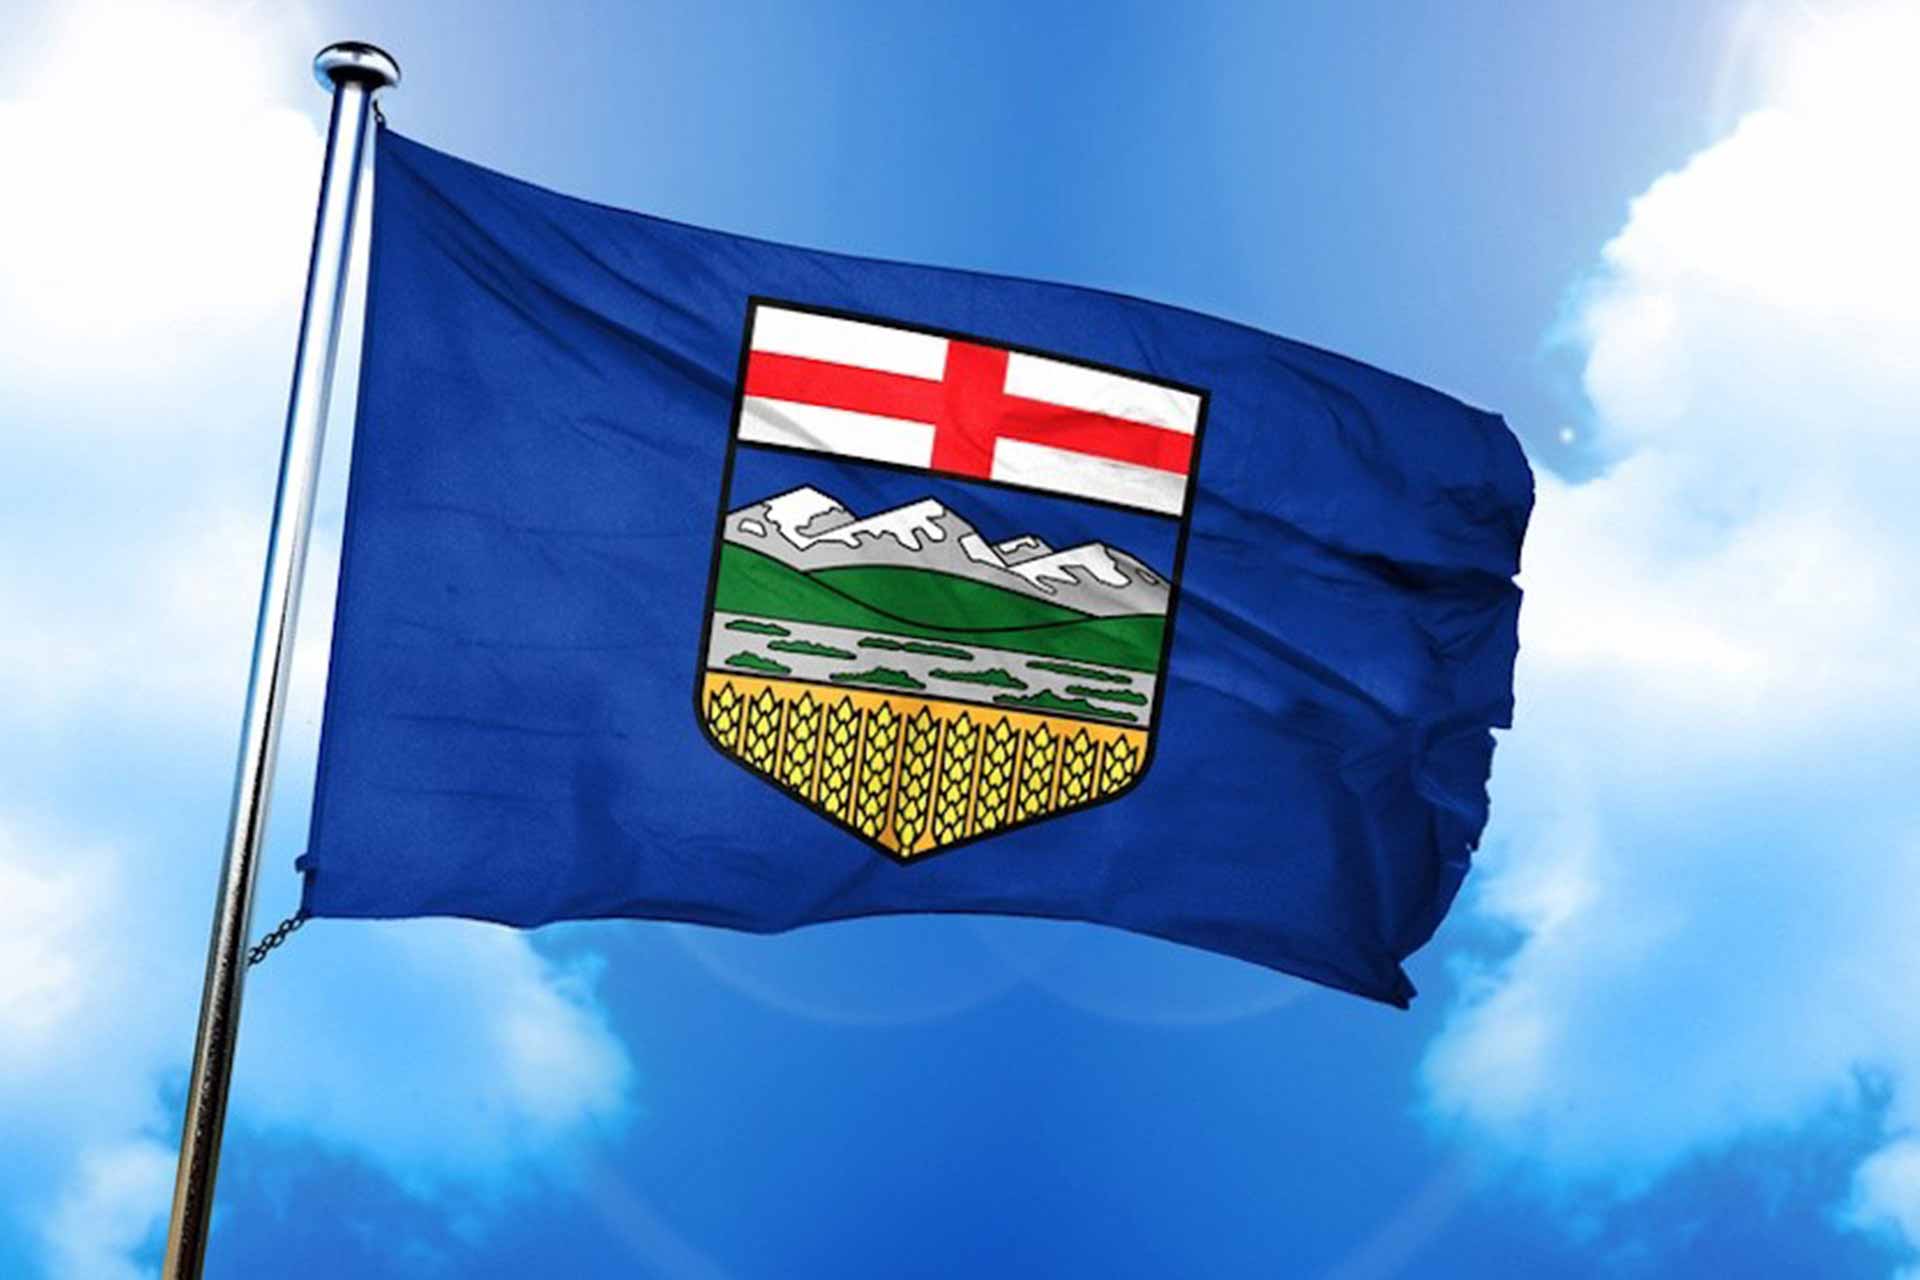 Alberta Fourth Province to Expand Access to Spinraza™ for Patients Impacted with Spinal Muscular Atrophy